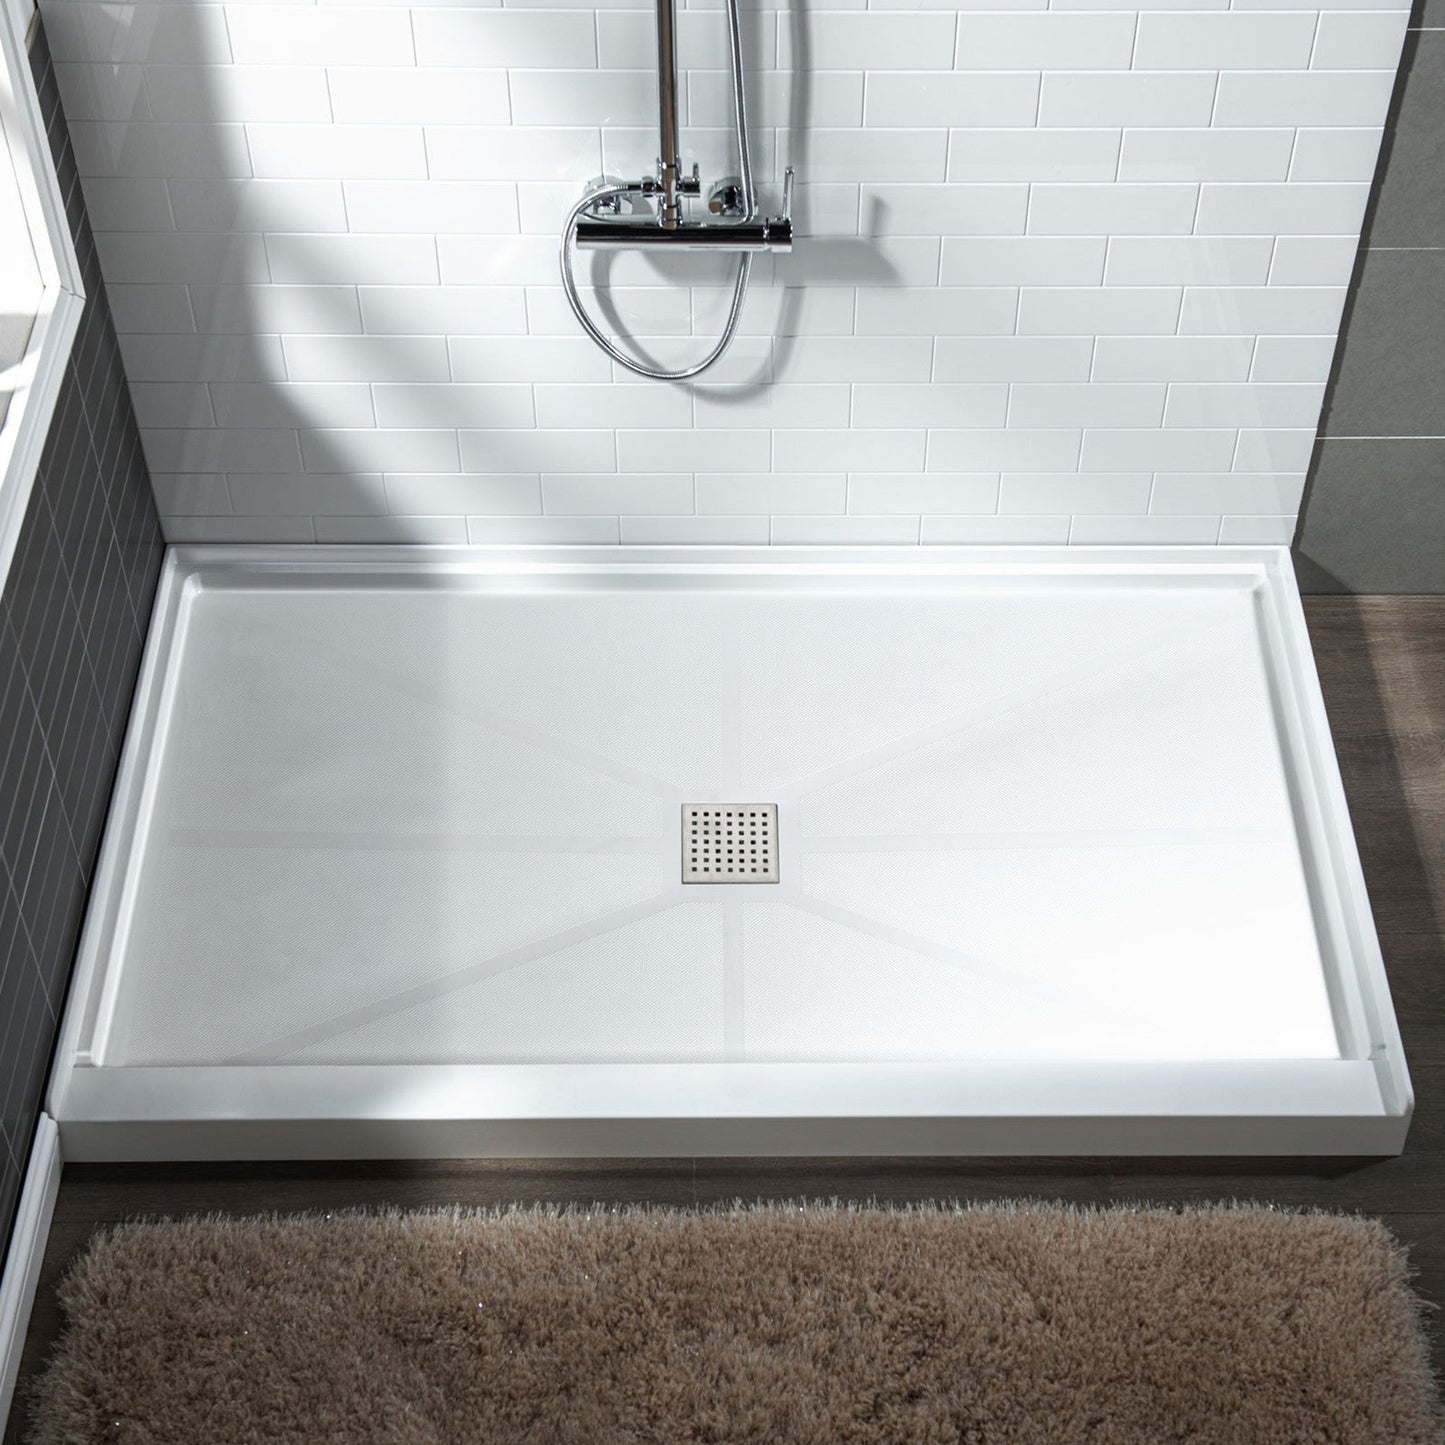 WoodBridge 60" x 32" White Solid Surface Shower Base Center Drain Location With Brushed Nickel Trench Drain Cover